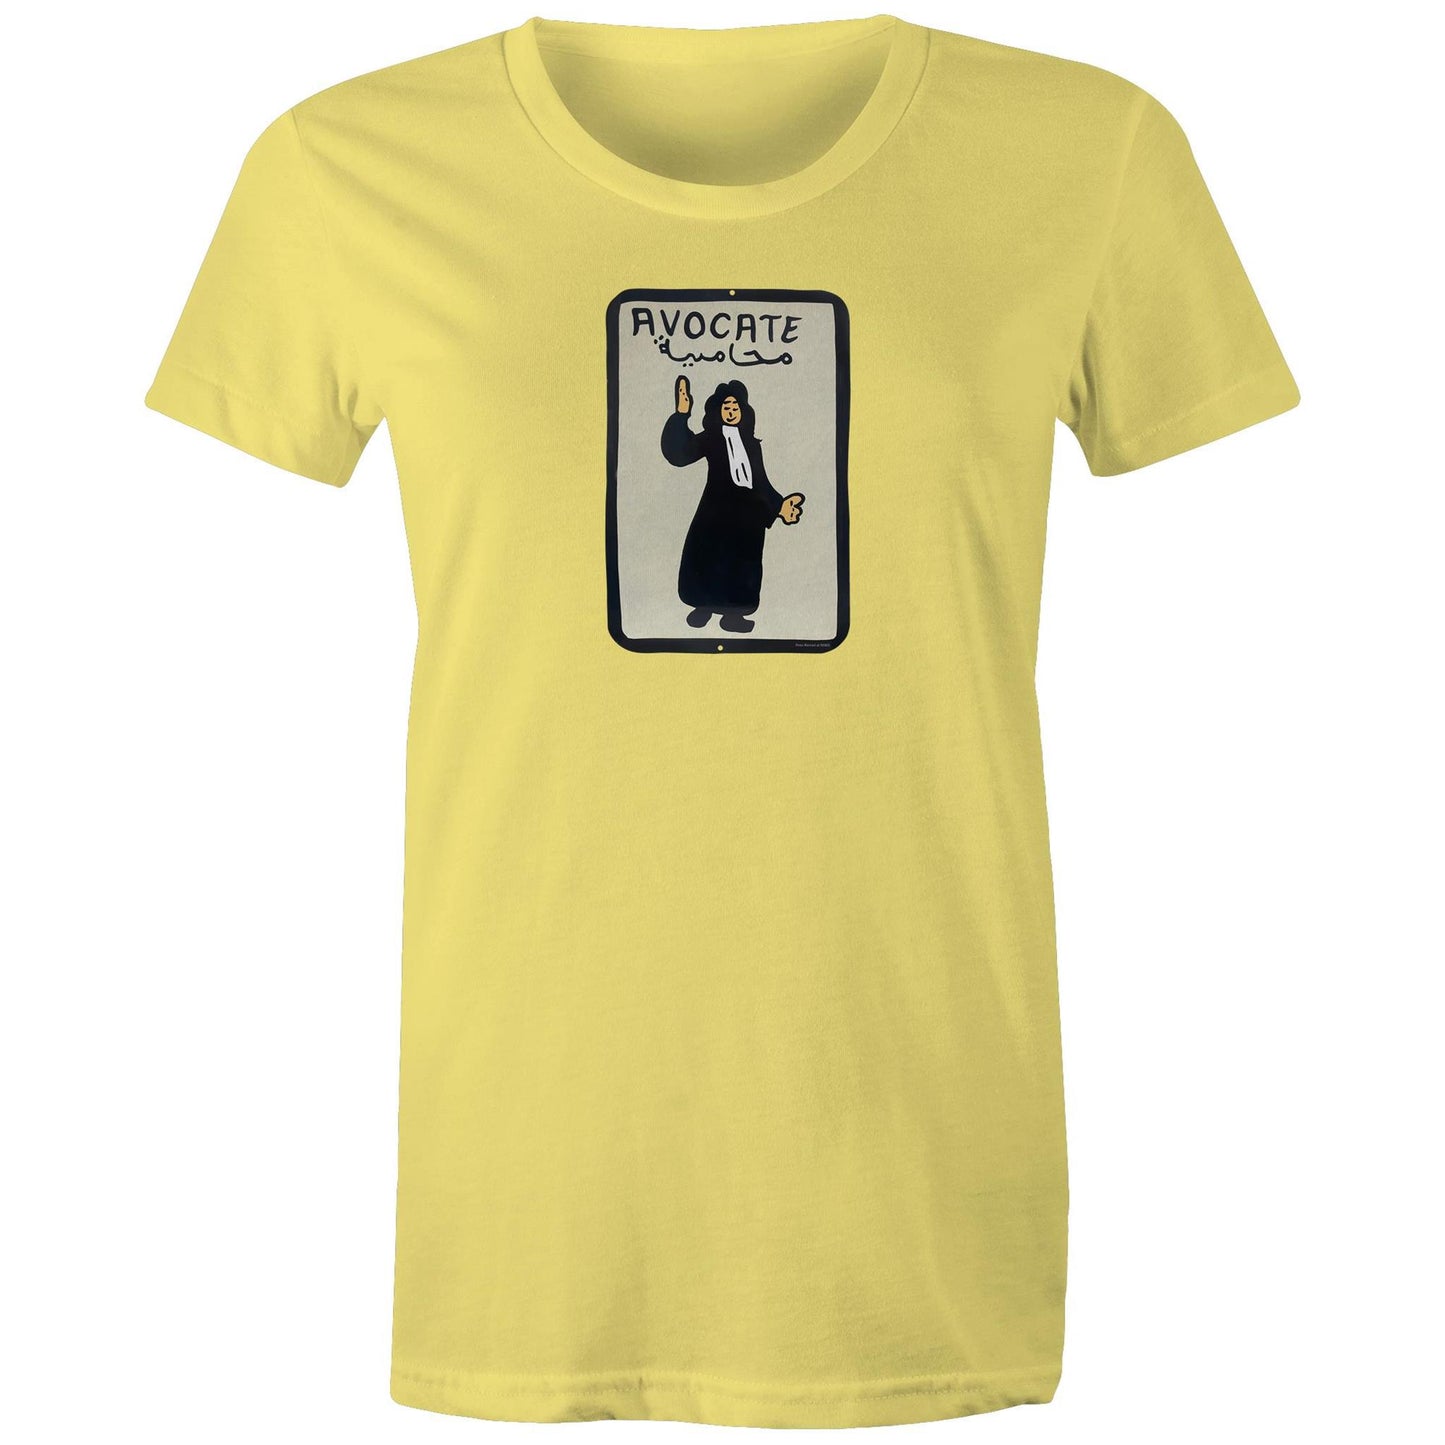 Avocate T Shirts for Women